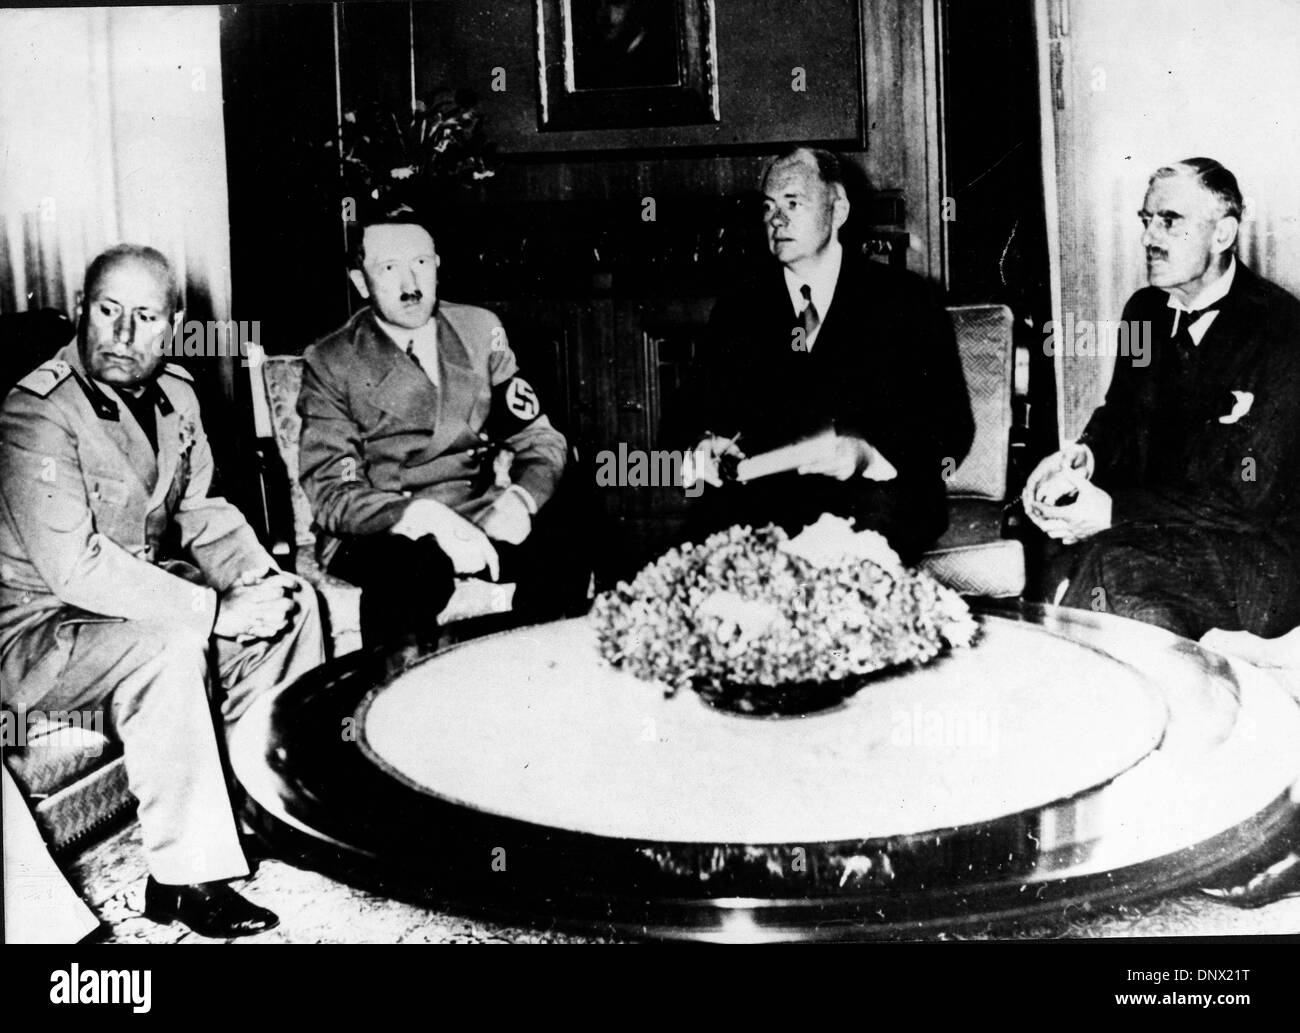 Sept. 30, 1938 - Munich, Germany - ADOLF HITLER with, MUSSOLINI, DR. PAUL SCHIMDT, and then British Prime Minister CHAMBERLAIN at the Munich Conference. Adolf Hitler (April 20, 1889ÐApril 30, 1945) was the Fuhrer und Reichskanzler (Leader and Imperial chancellor) of Germany from 1933 to his death. He was leader of the National Socialist German Workers Party (NSDAP), better known as Stock Photo